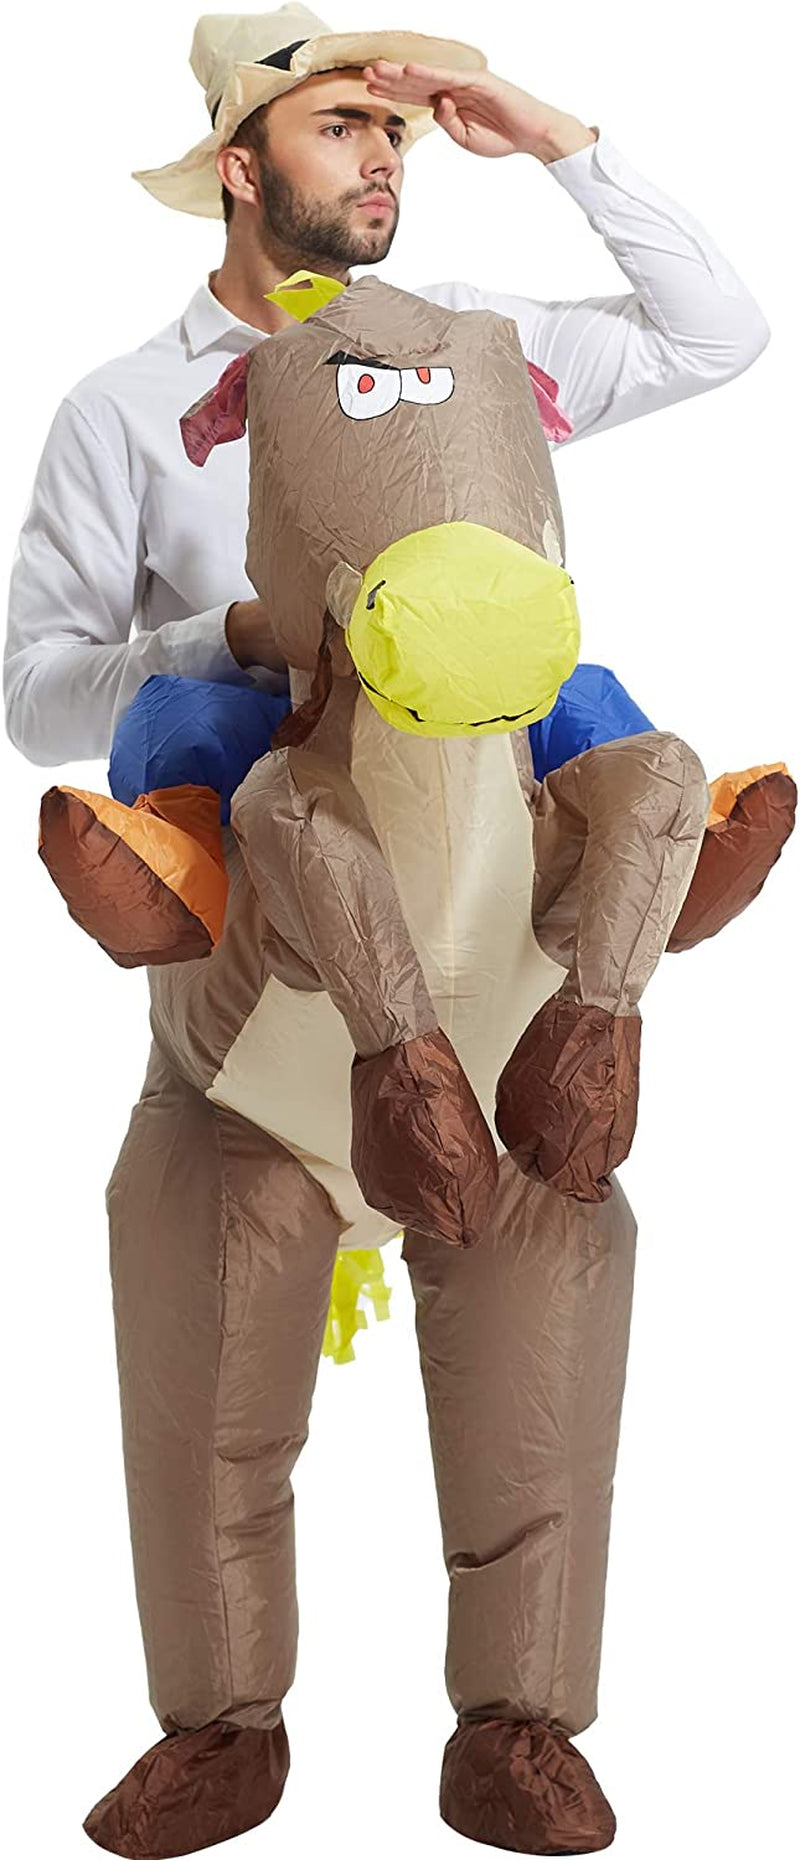 TOLOCO Inflatable Costume Adults and Kid, Cowboy Costume, Inflatable Horse Costum, Blow up Costume Halloween